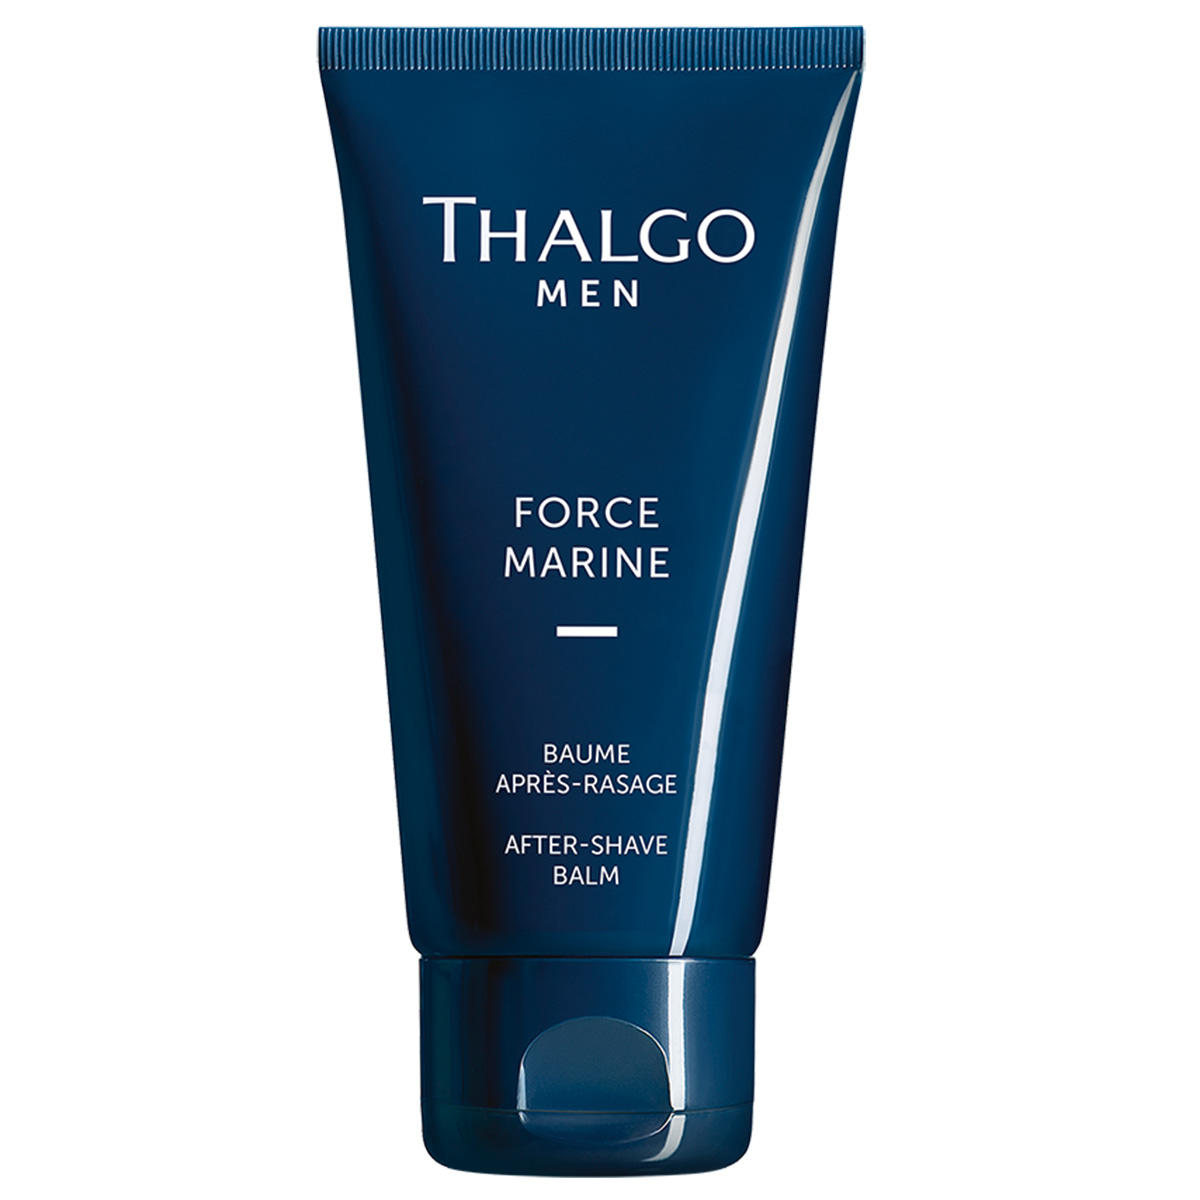 THALGO FORCE MARINE Aftershave-Balsam 75 ml - 1